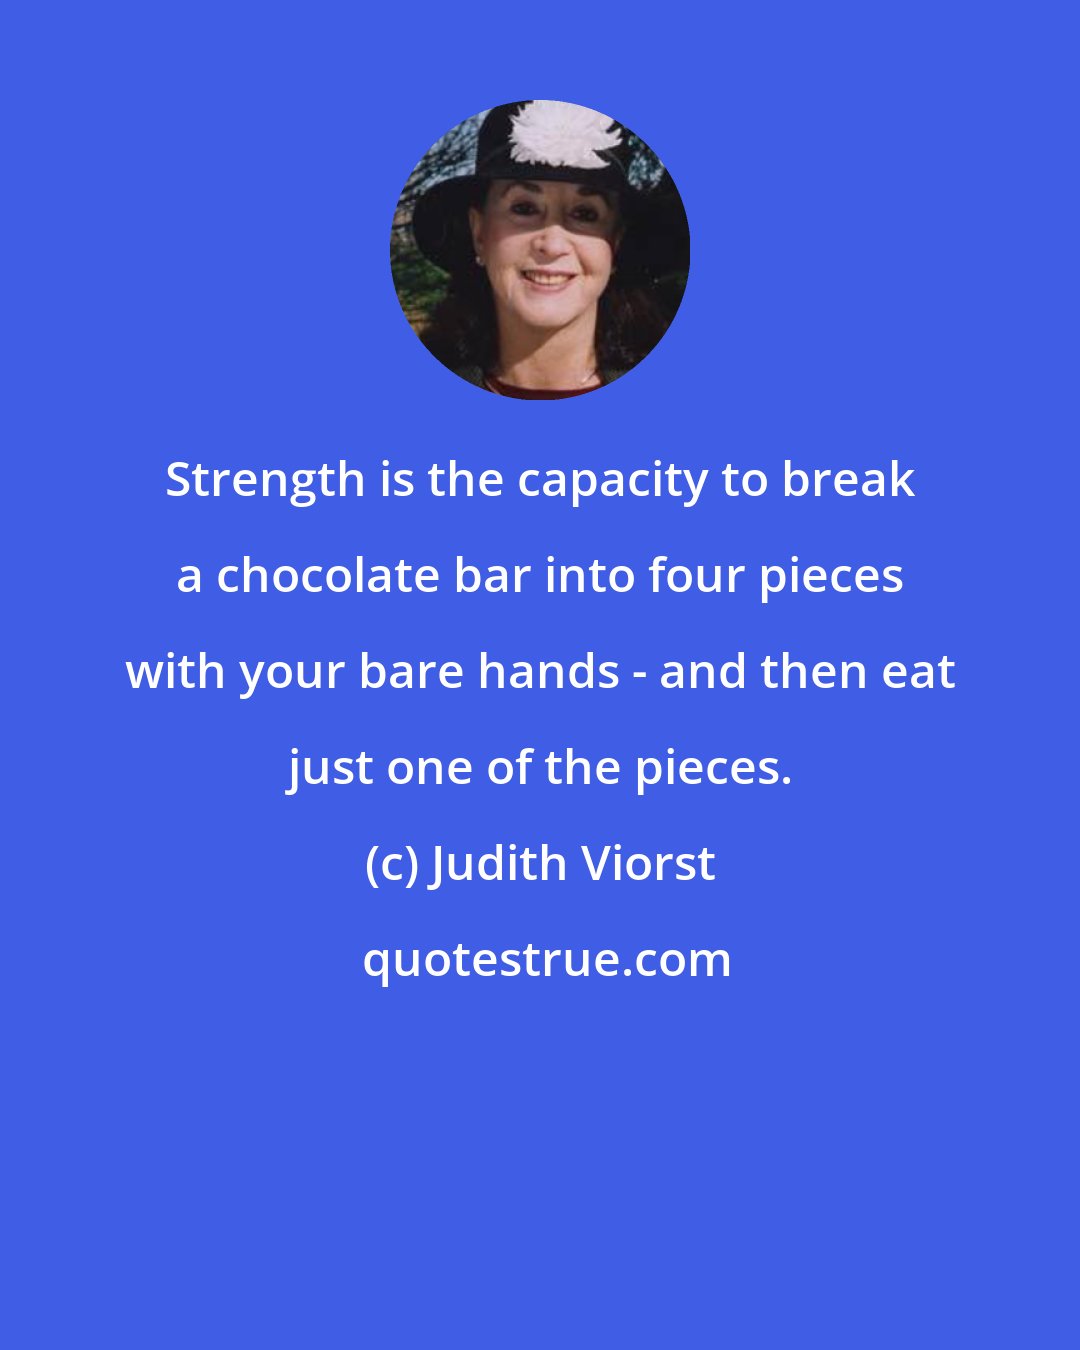 Judith Viorst: Strength is the capacity to break a chocolate bar into four pieces with your bare hands - and then eat just one of the pieces.